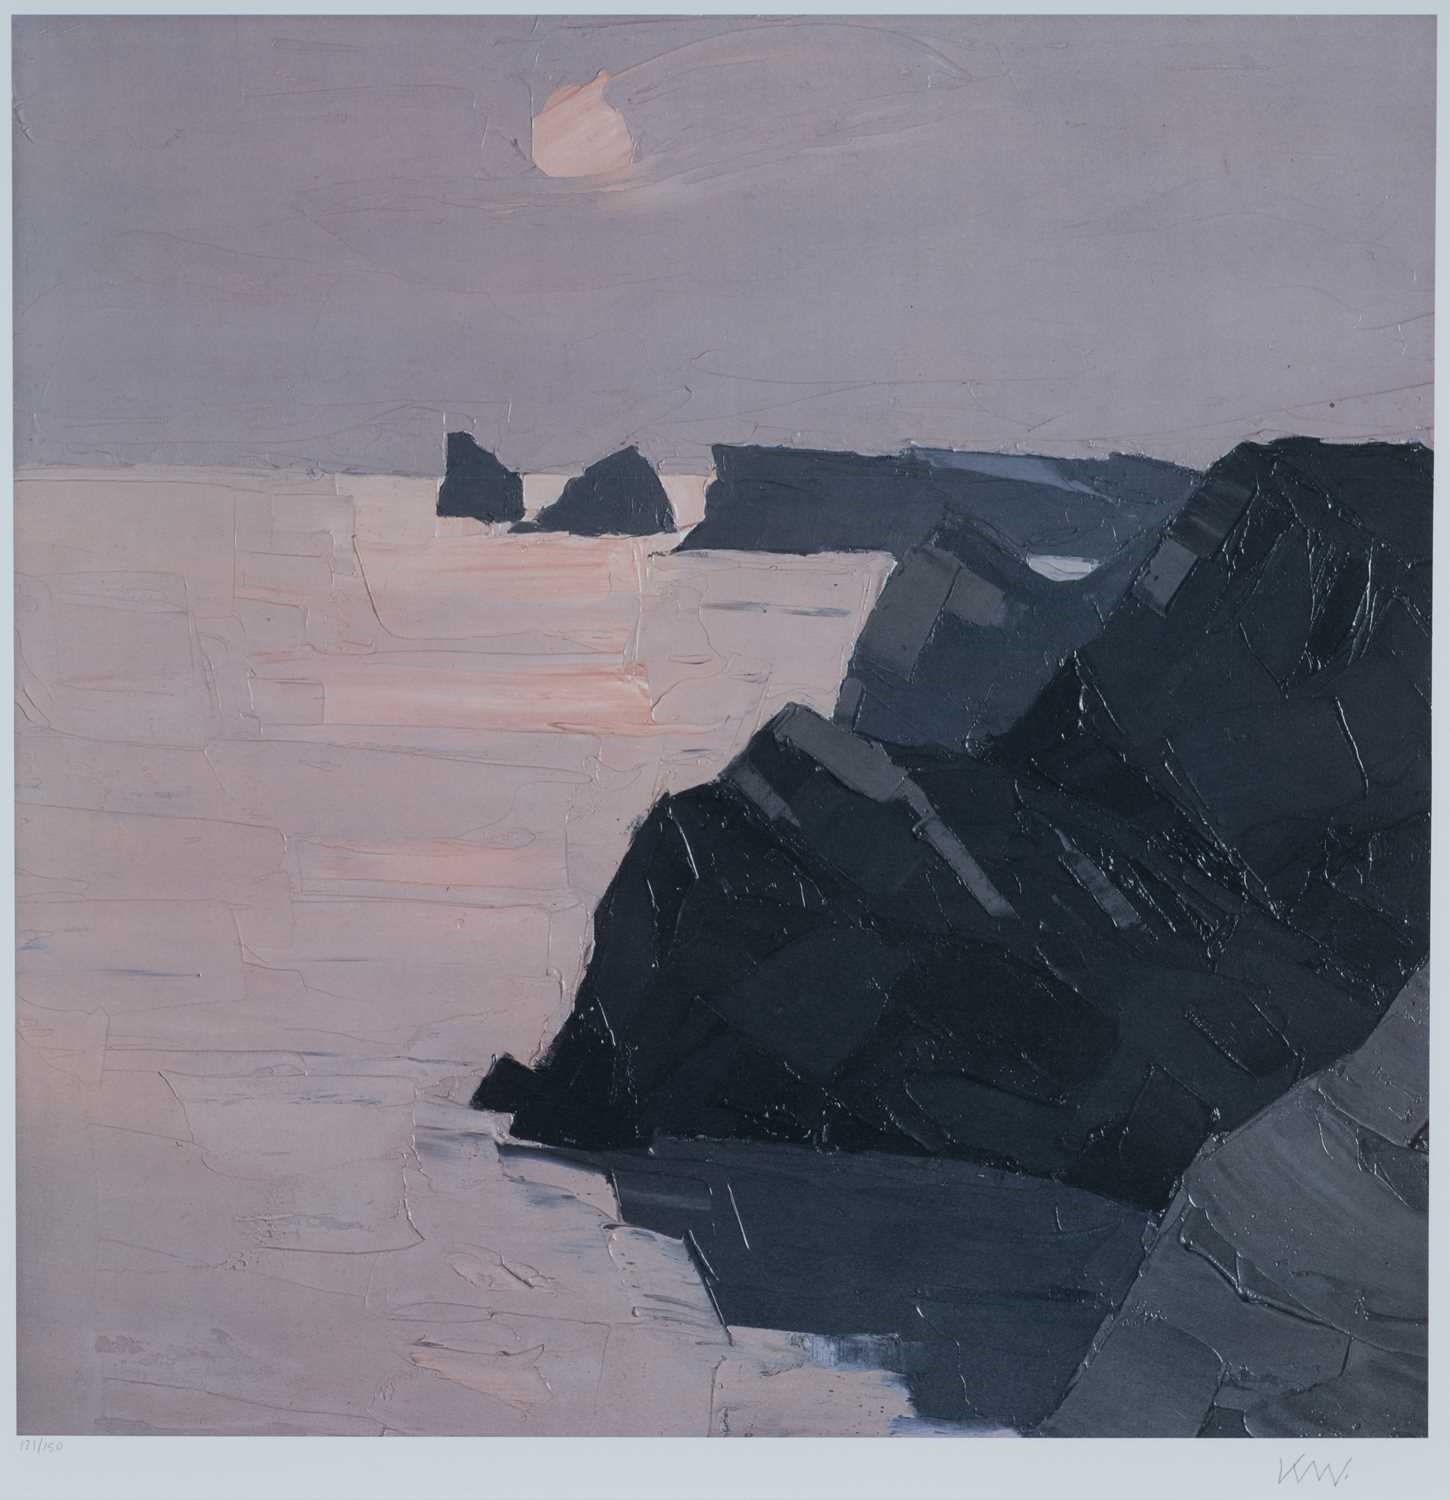 ‡ SIR KYFFIN WILLIAMS RA limited edition (121/150) print - Gower at sunset